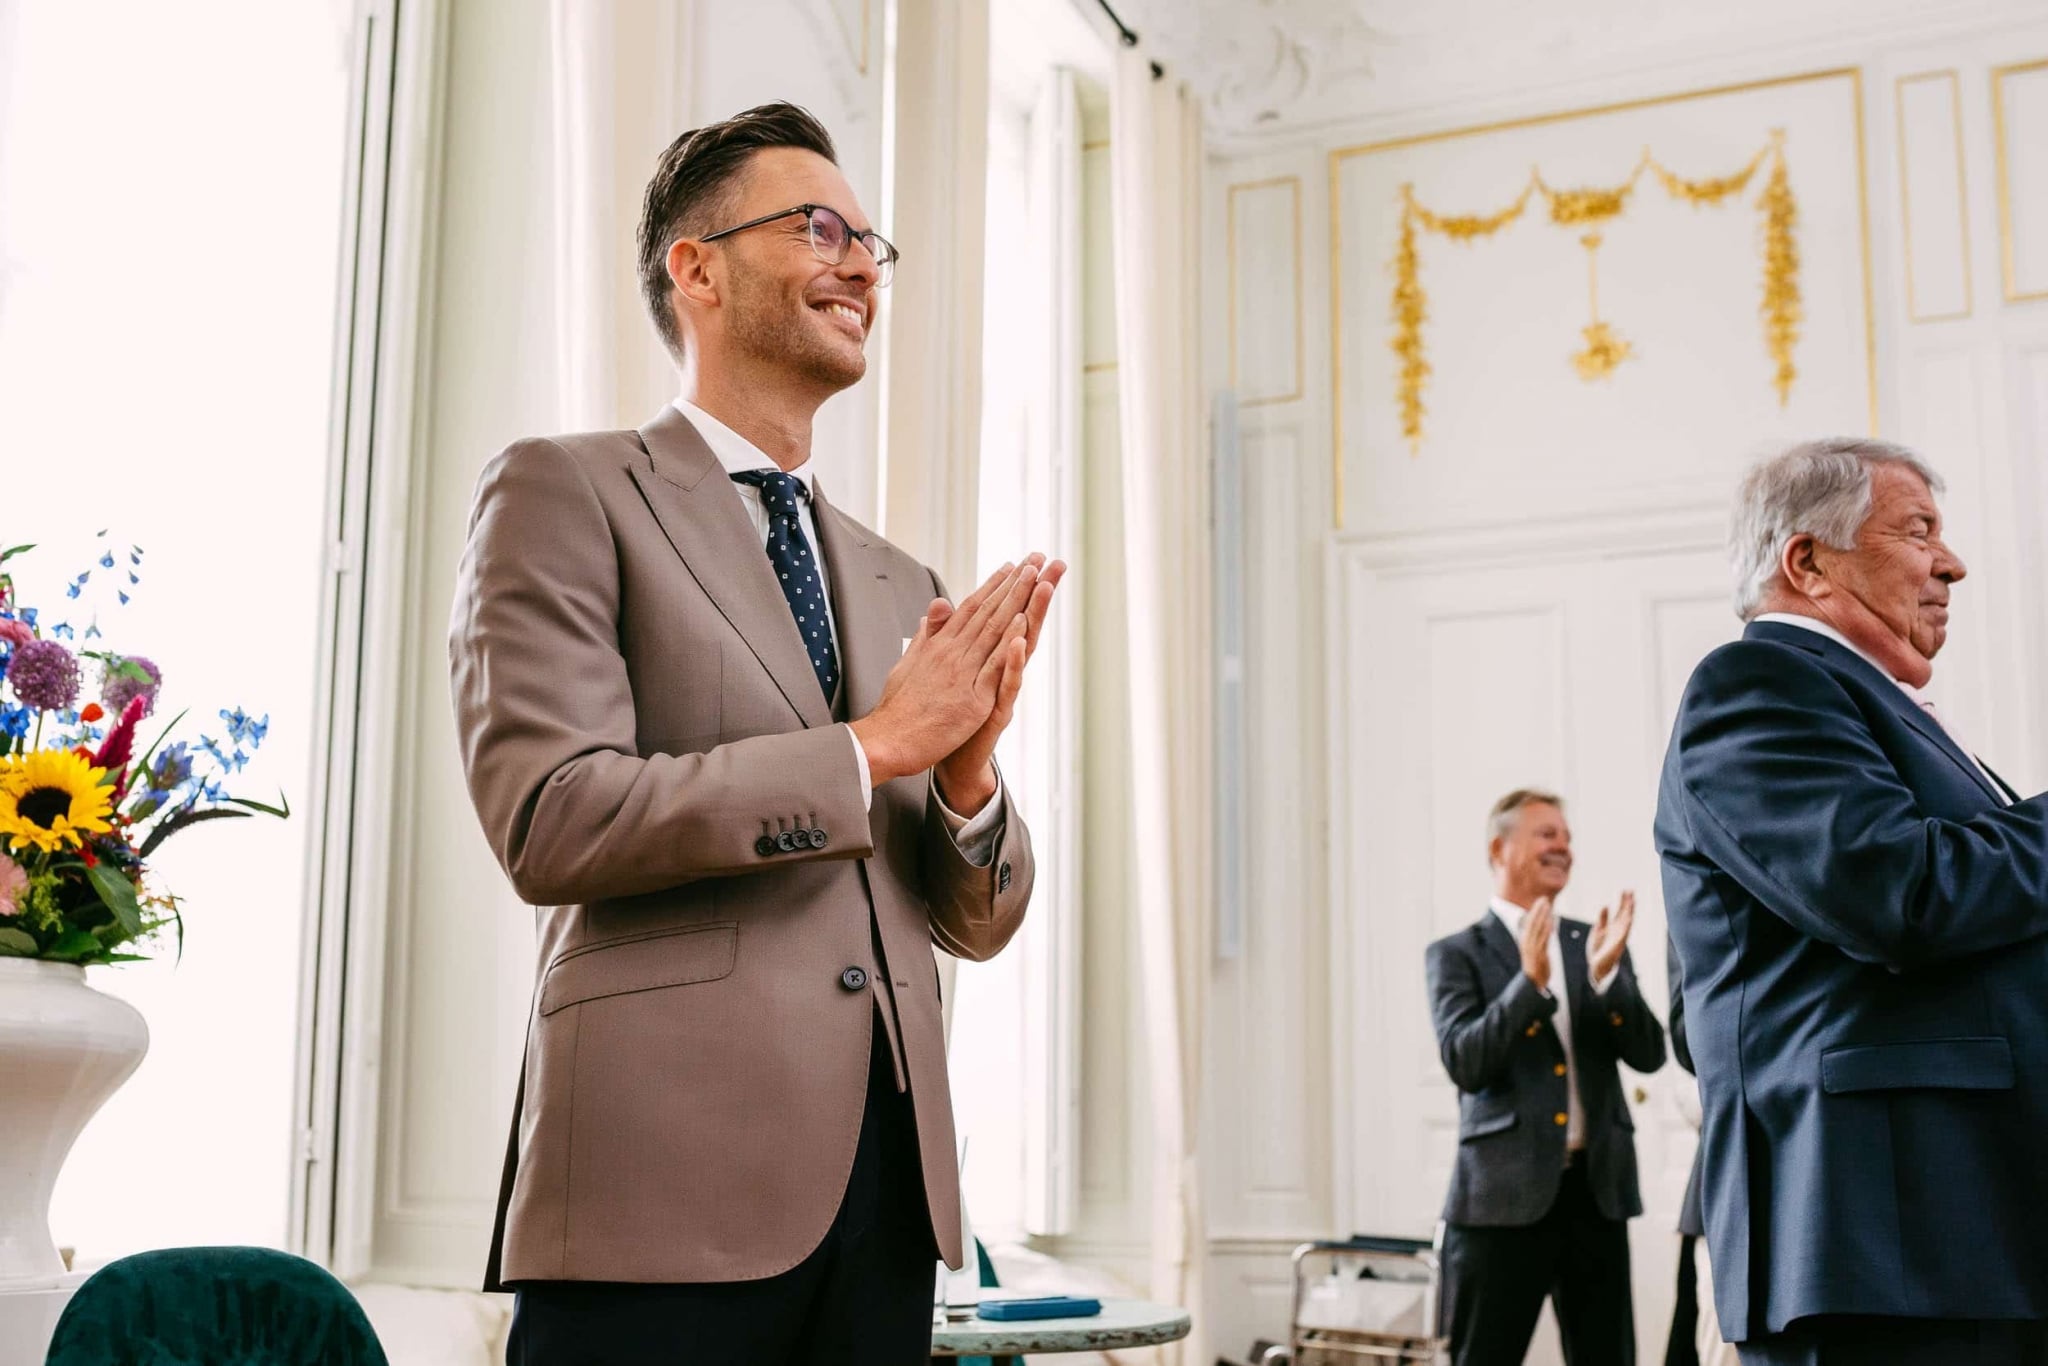 A man in a suit applauds another man in a room.